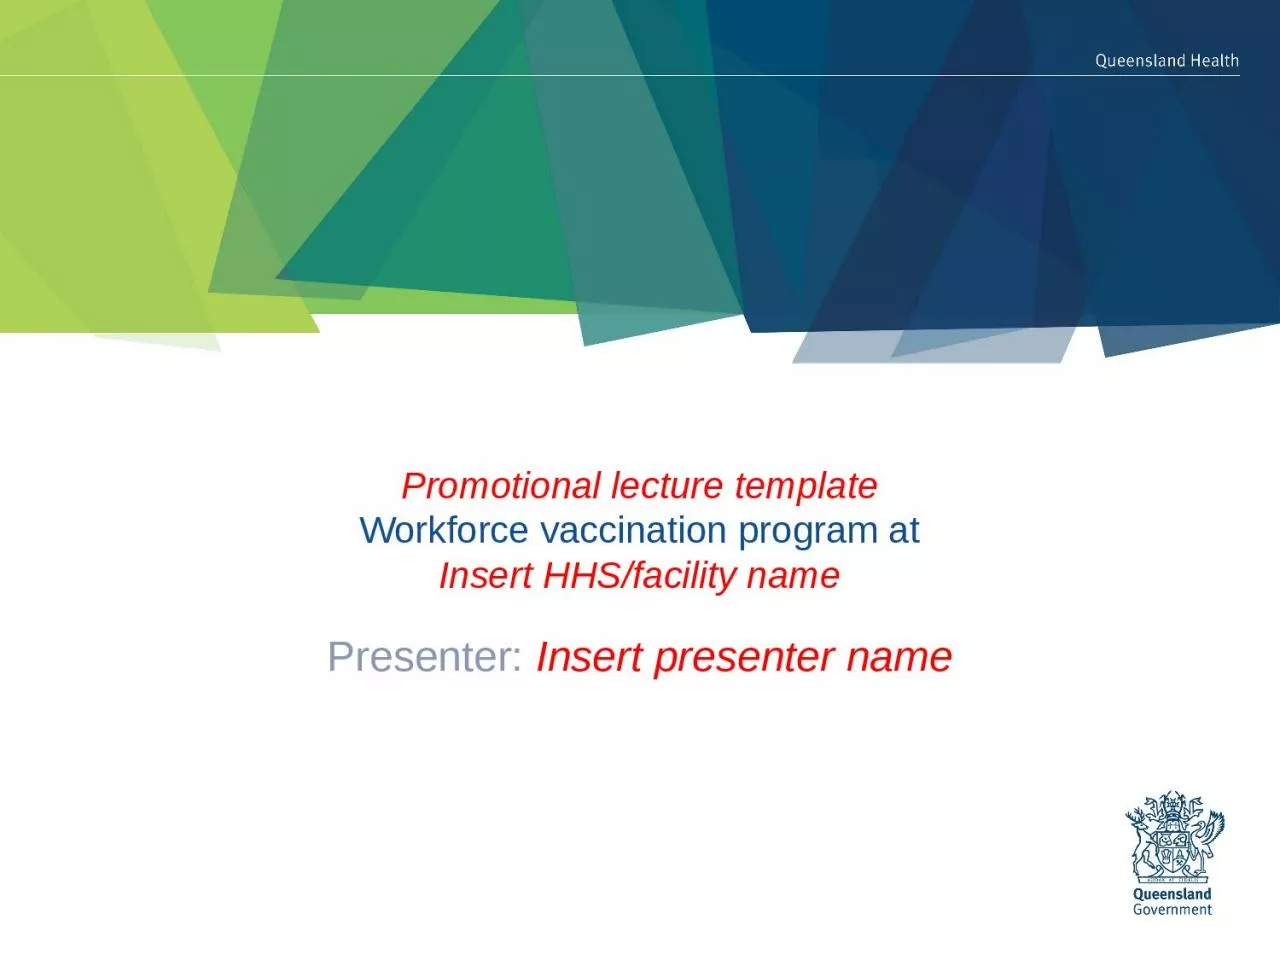 Promotional lecture template